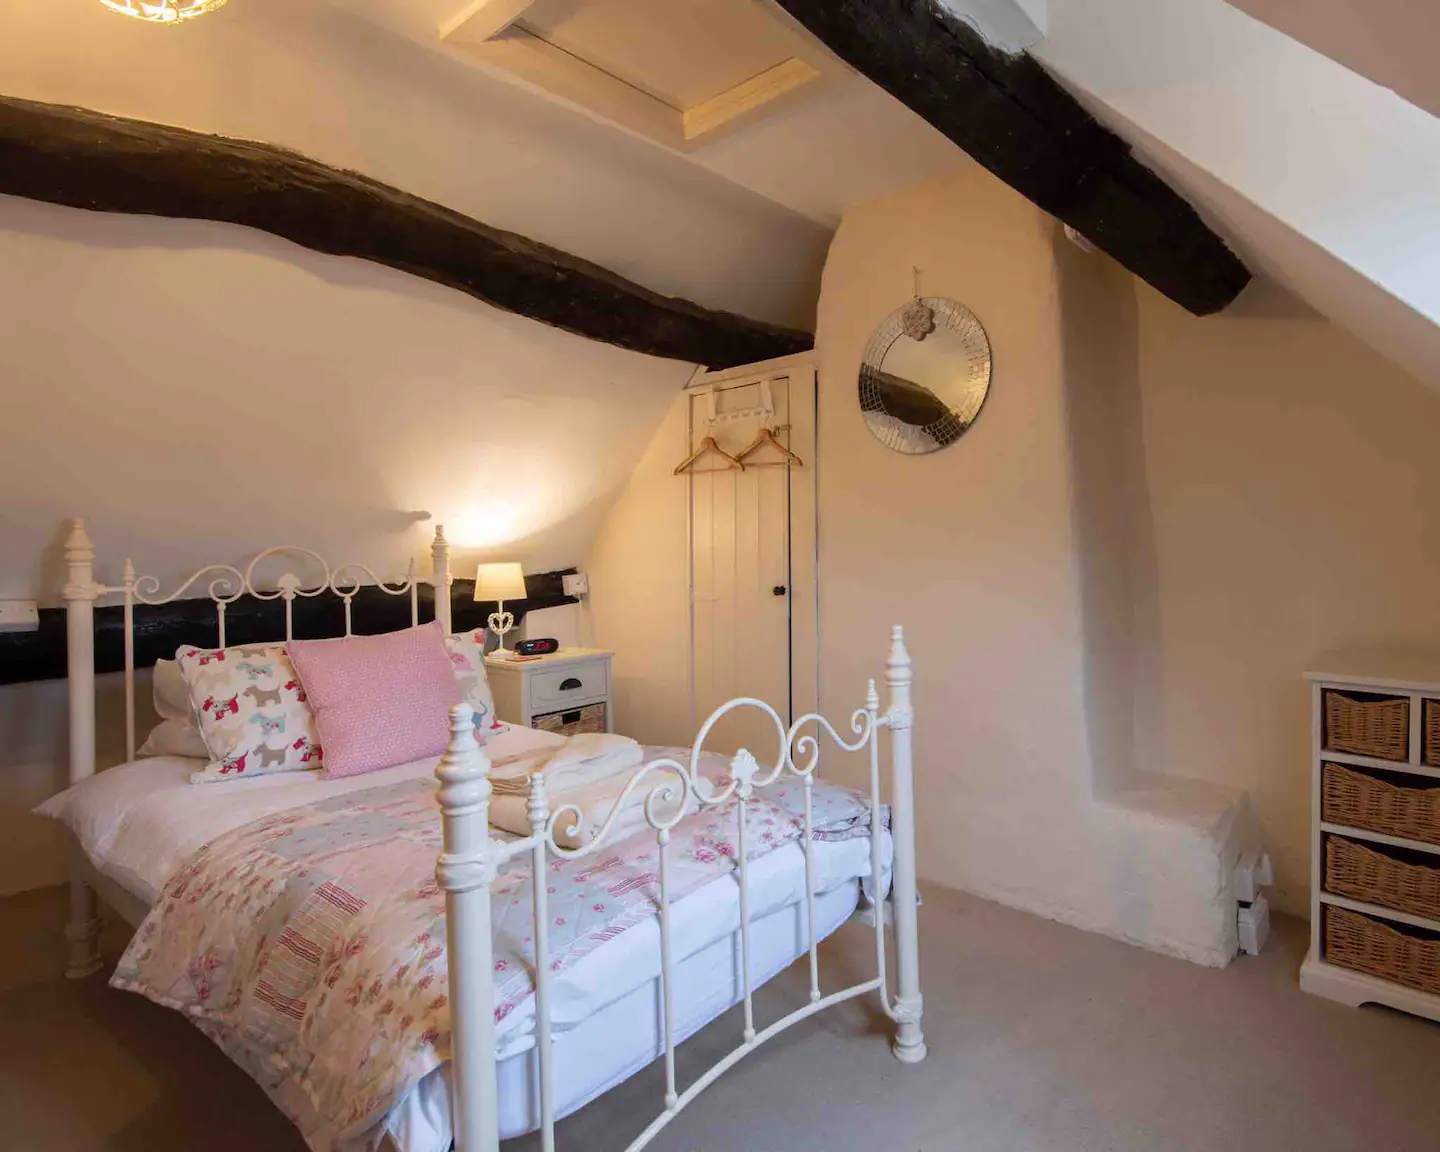 Top-floor attic room with a lovely single bed